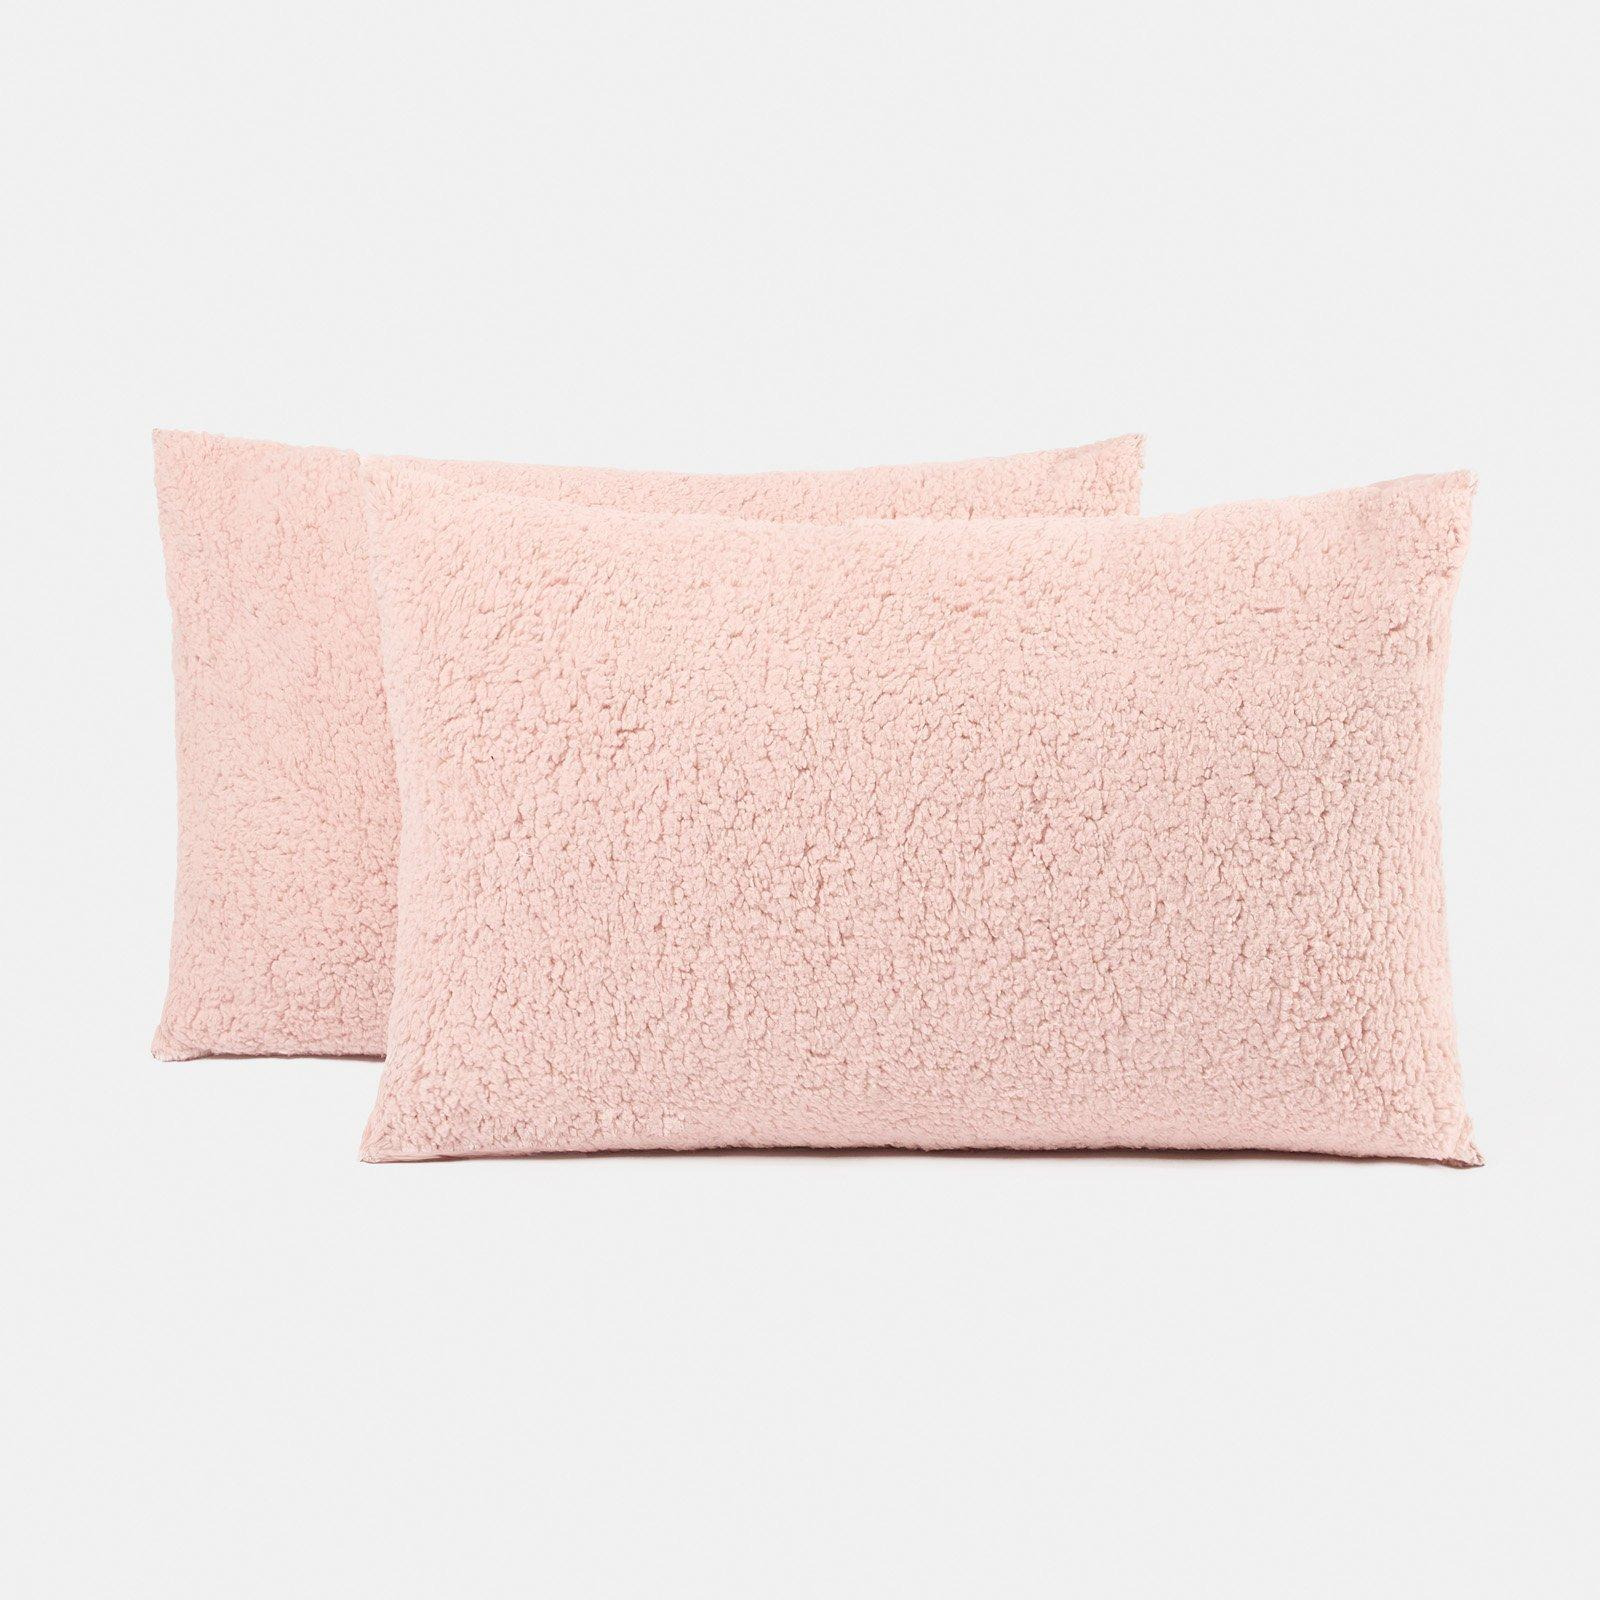 2 x Pack Of Teddy Fleece Soft Filled Pillow Cushion - image 1